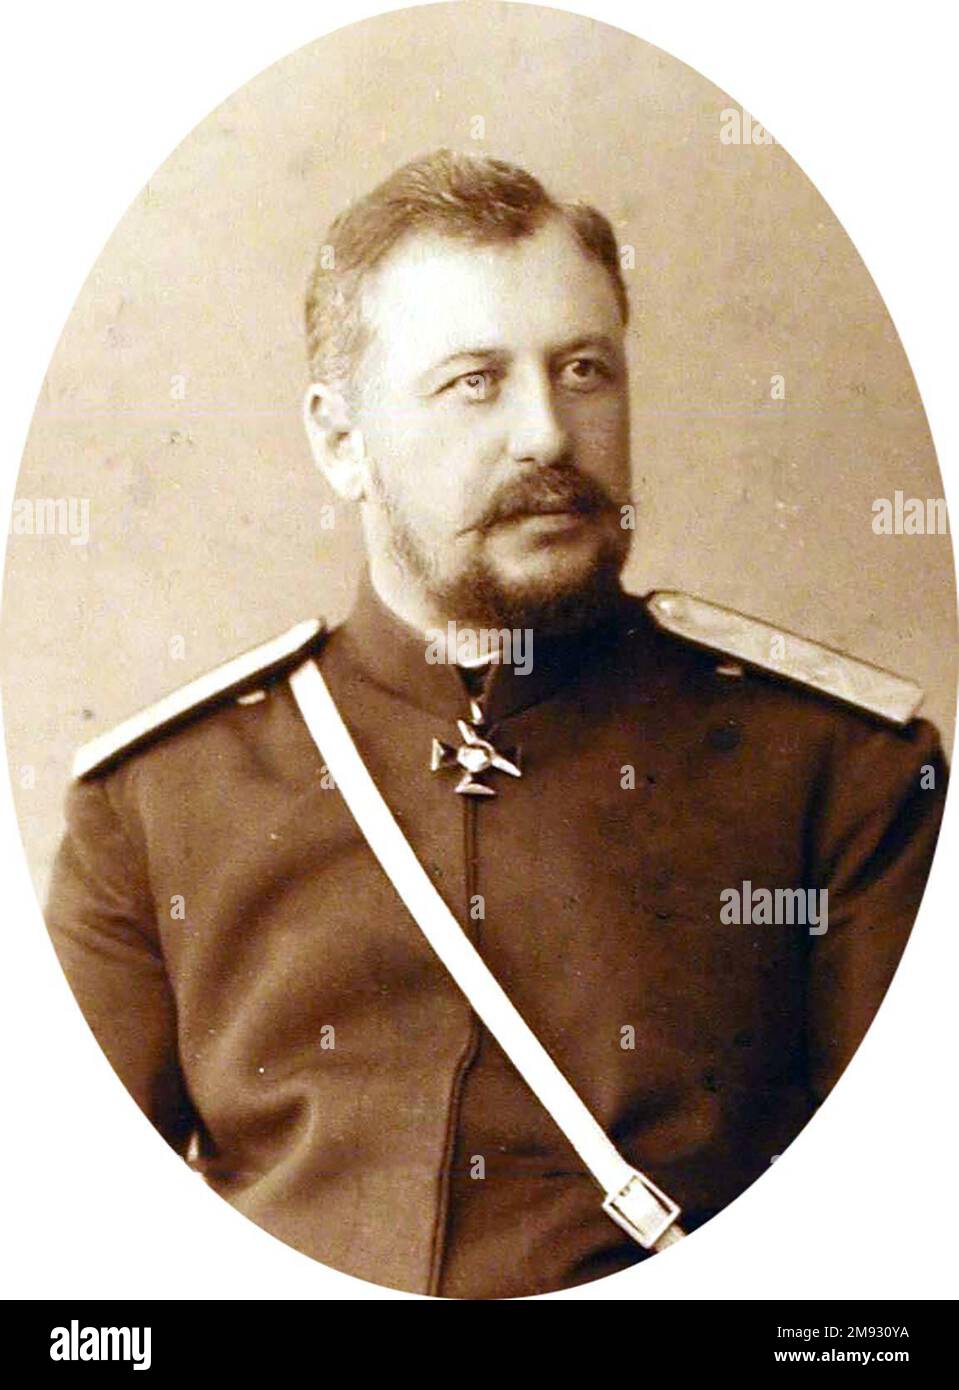 Valerian Dmitrievich Martynov (December 12, 1841 - June 12, 1901 Russian Empire)  - Major General, manager of the Court and Stables, adjutant wing, privy councillor. He was awarded the court title in the position of master of the horse (1881-1891). ca.  1883 Stock Photo